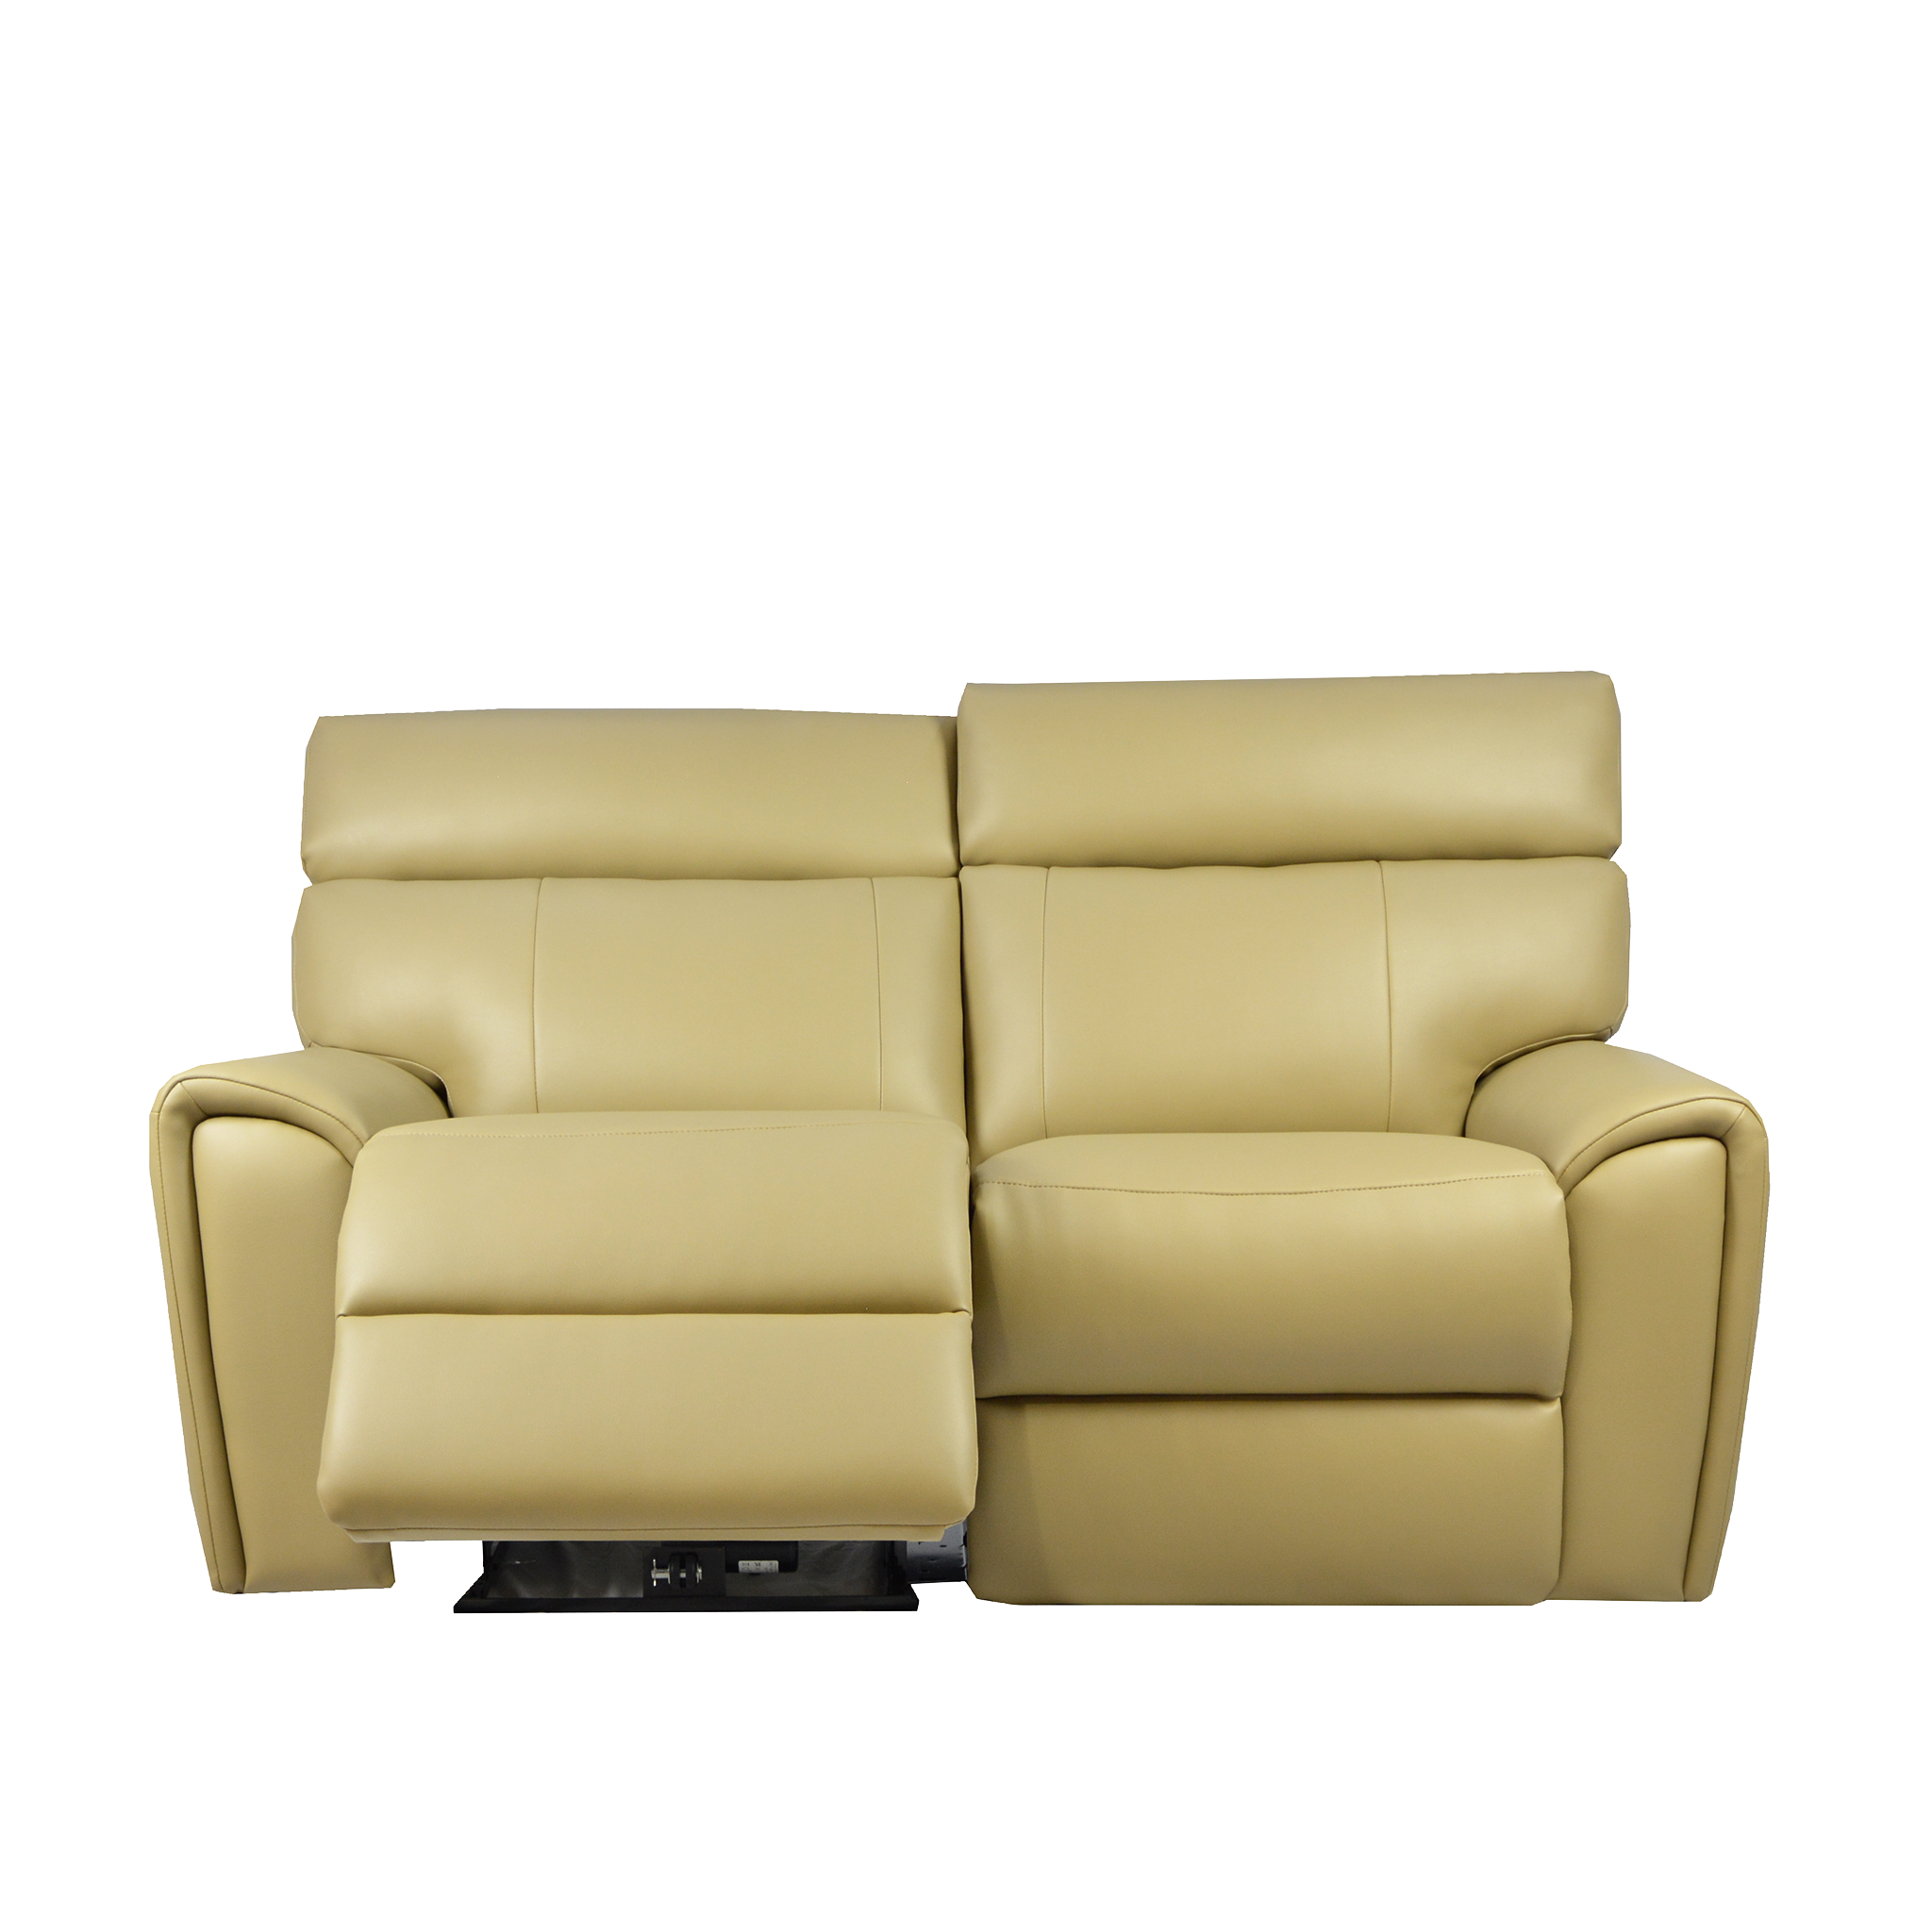 Clyde 2 Seater Electric Recliner Sofa